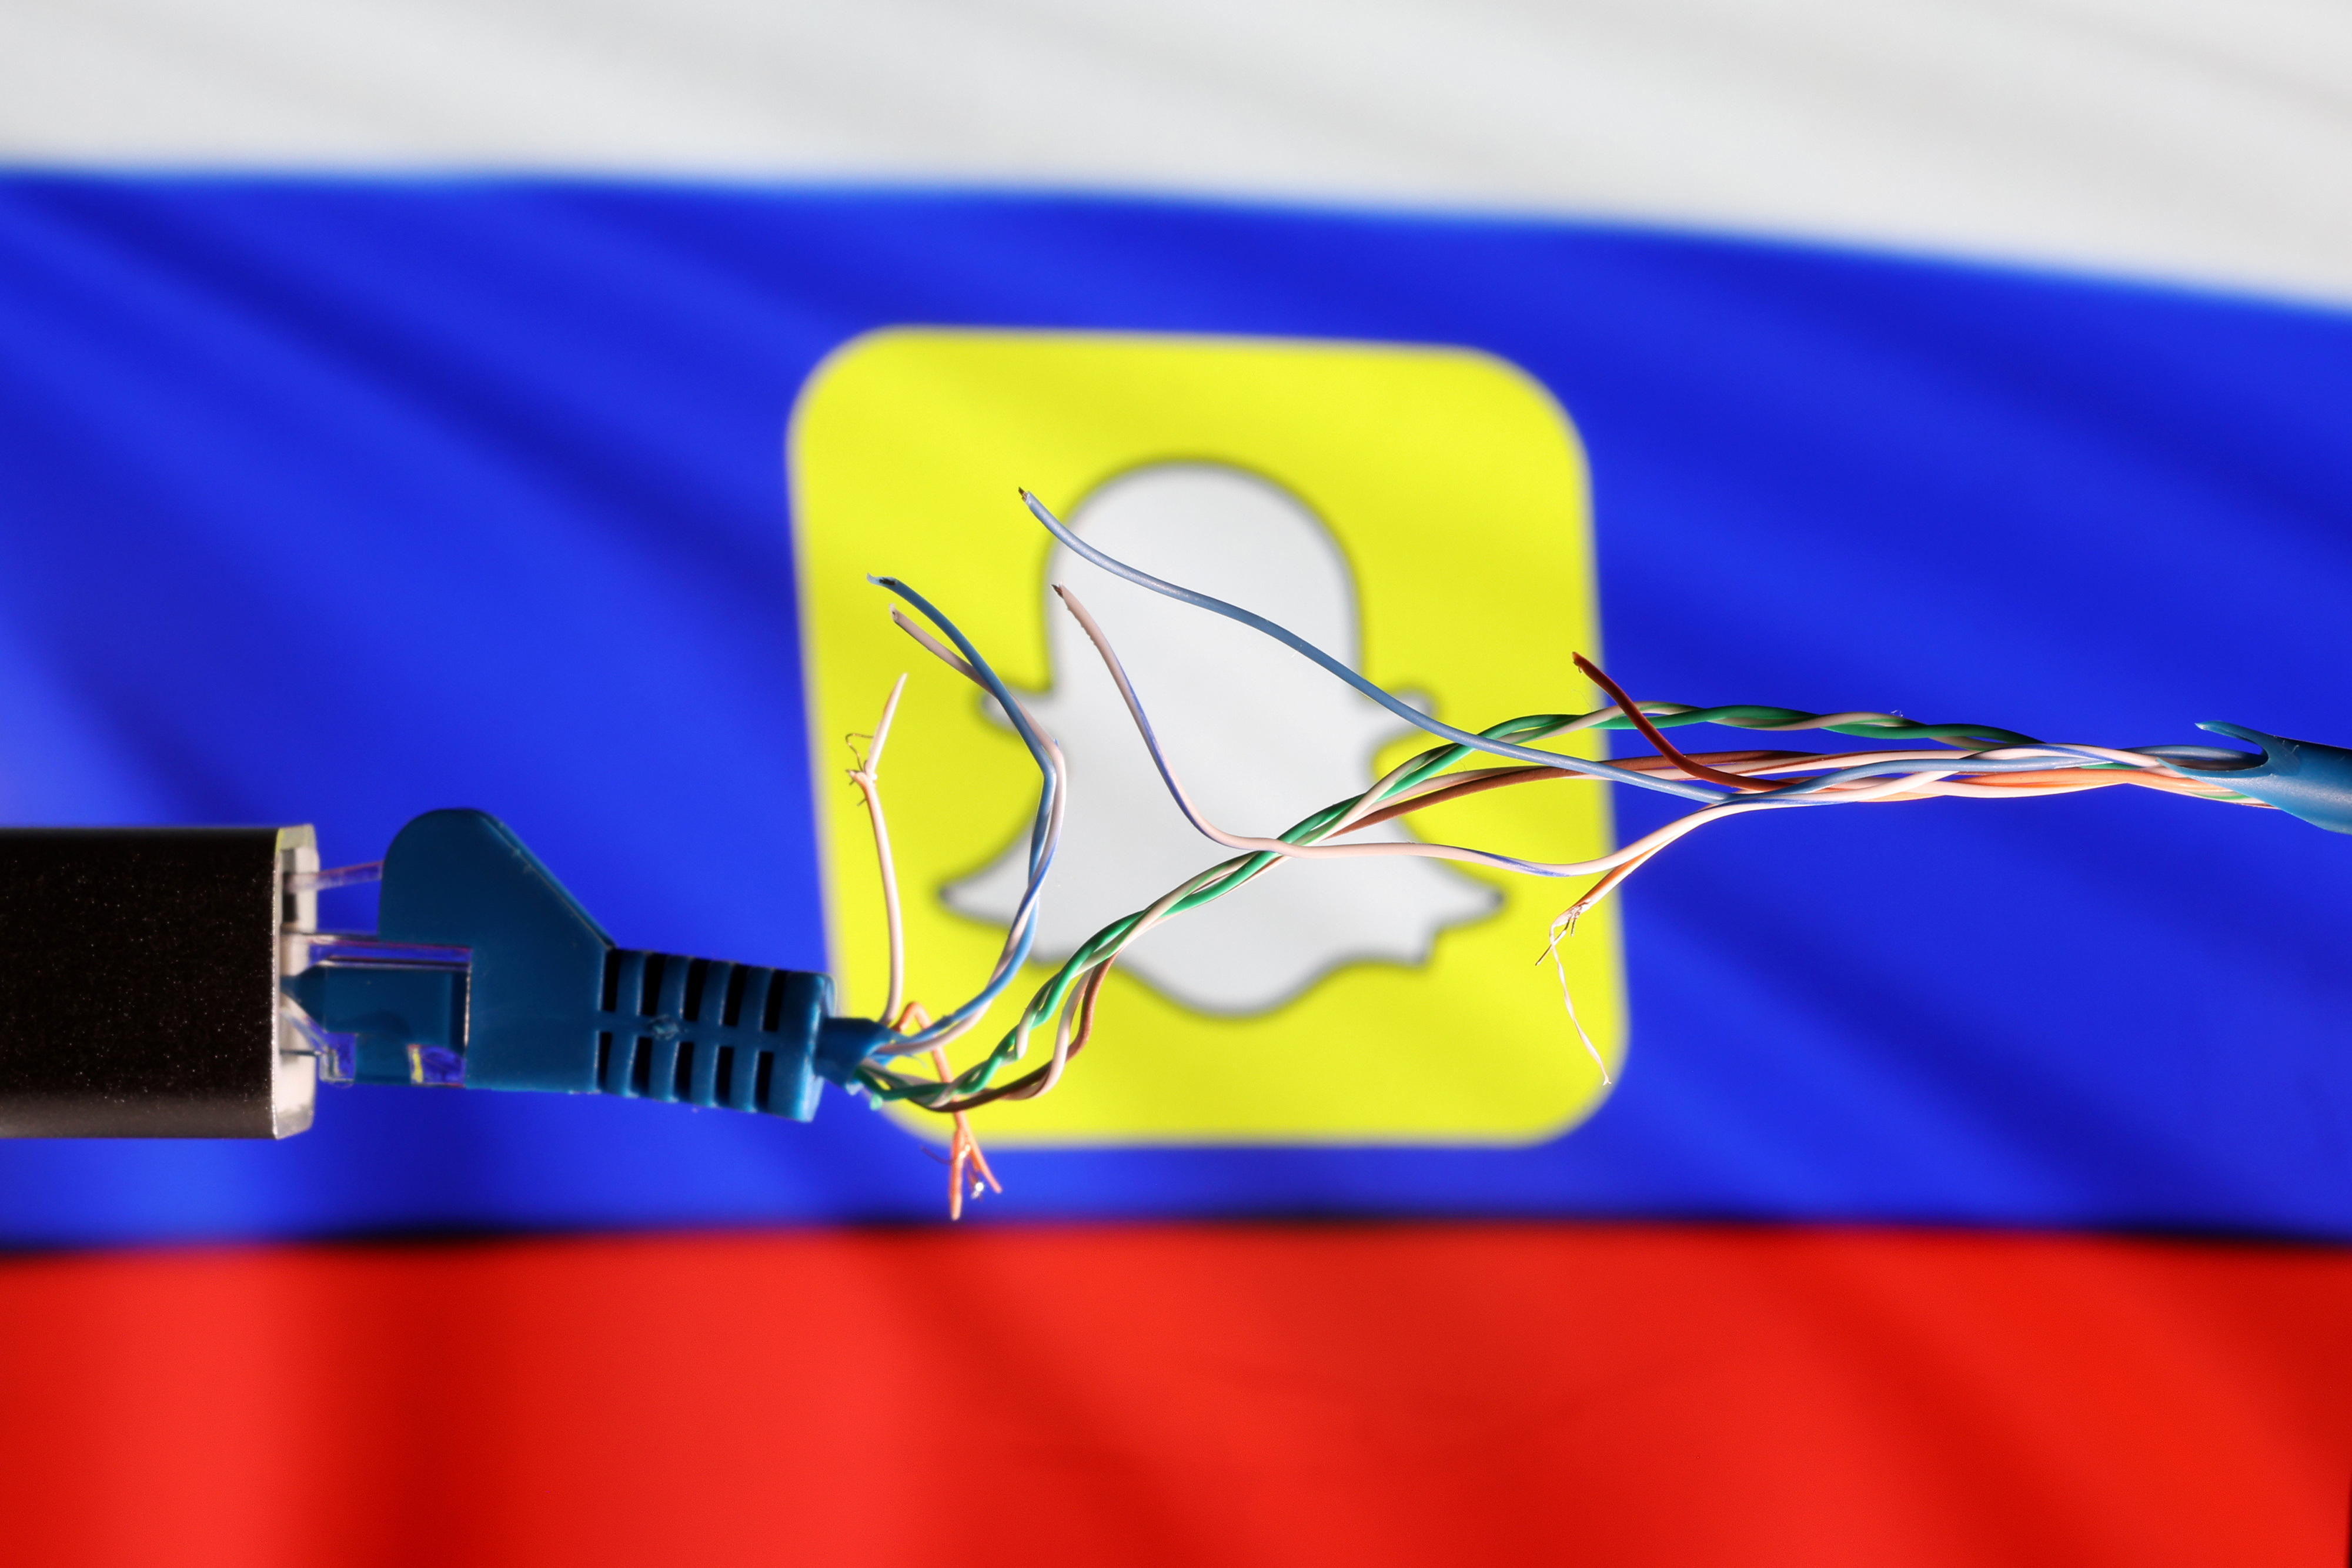 Illustration shows Broken Ethernet cable, Russian flag and SnapChat logo